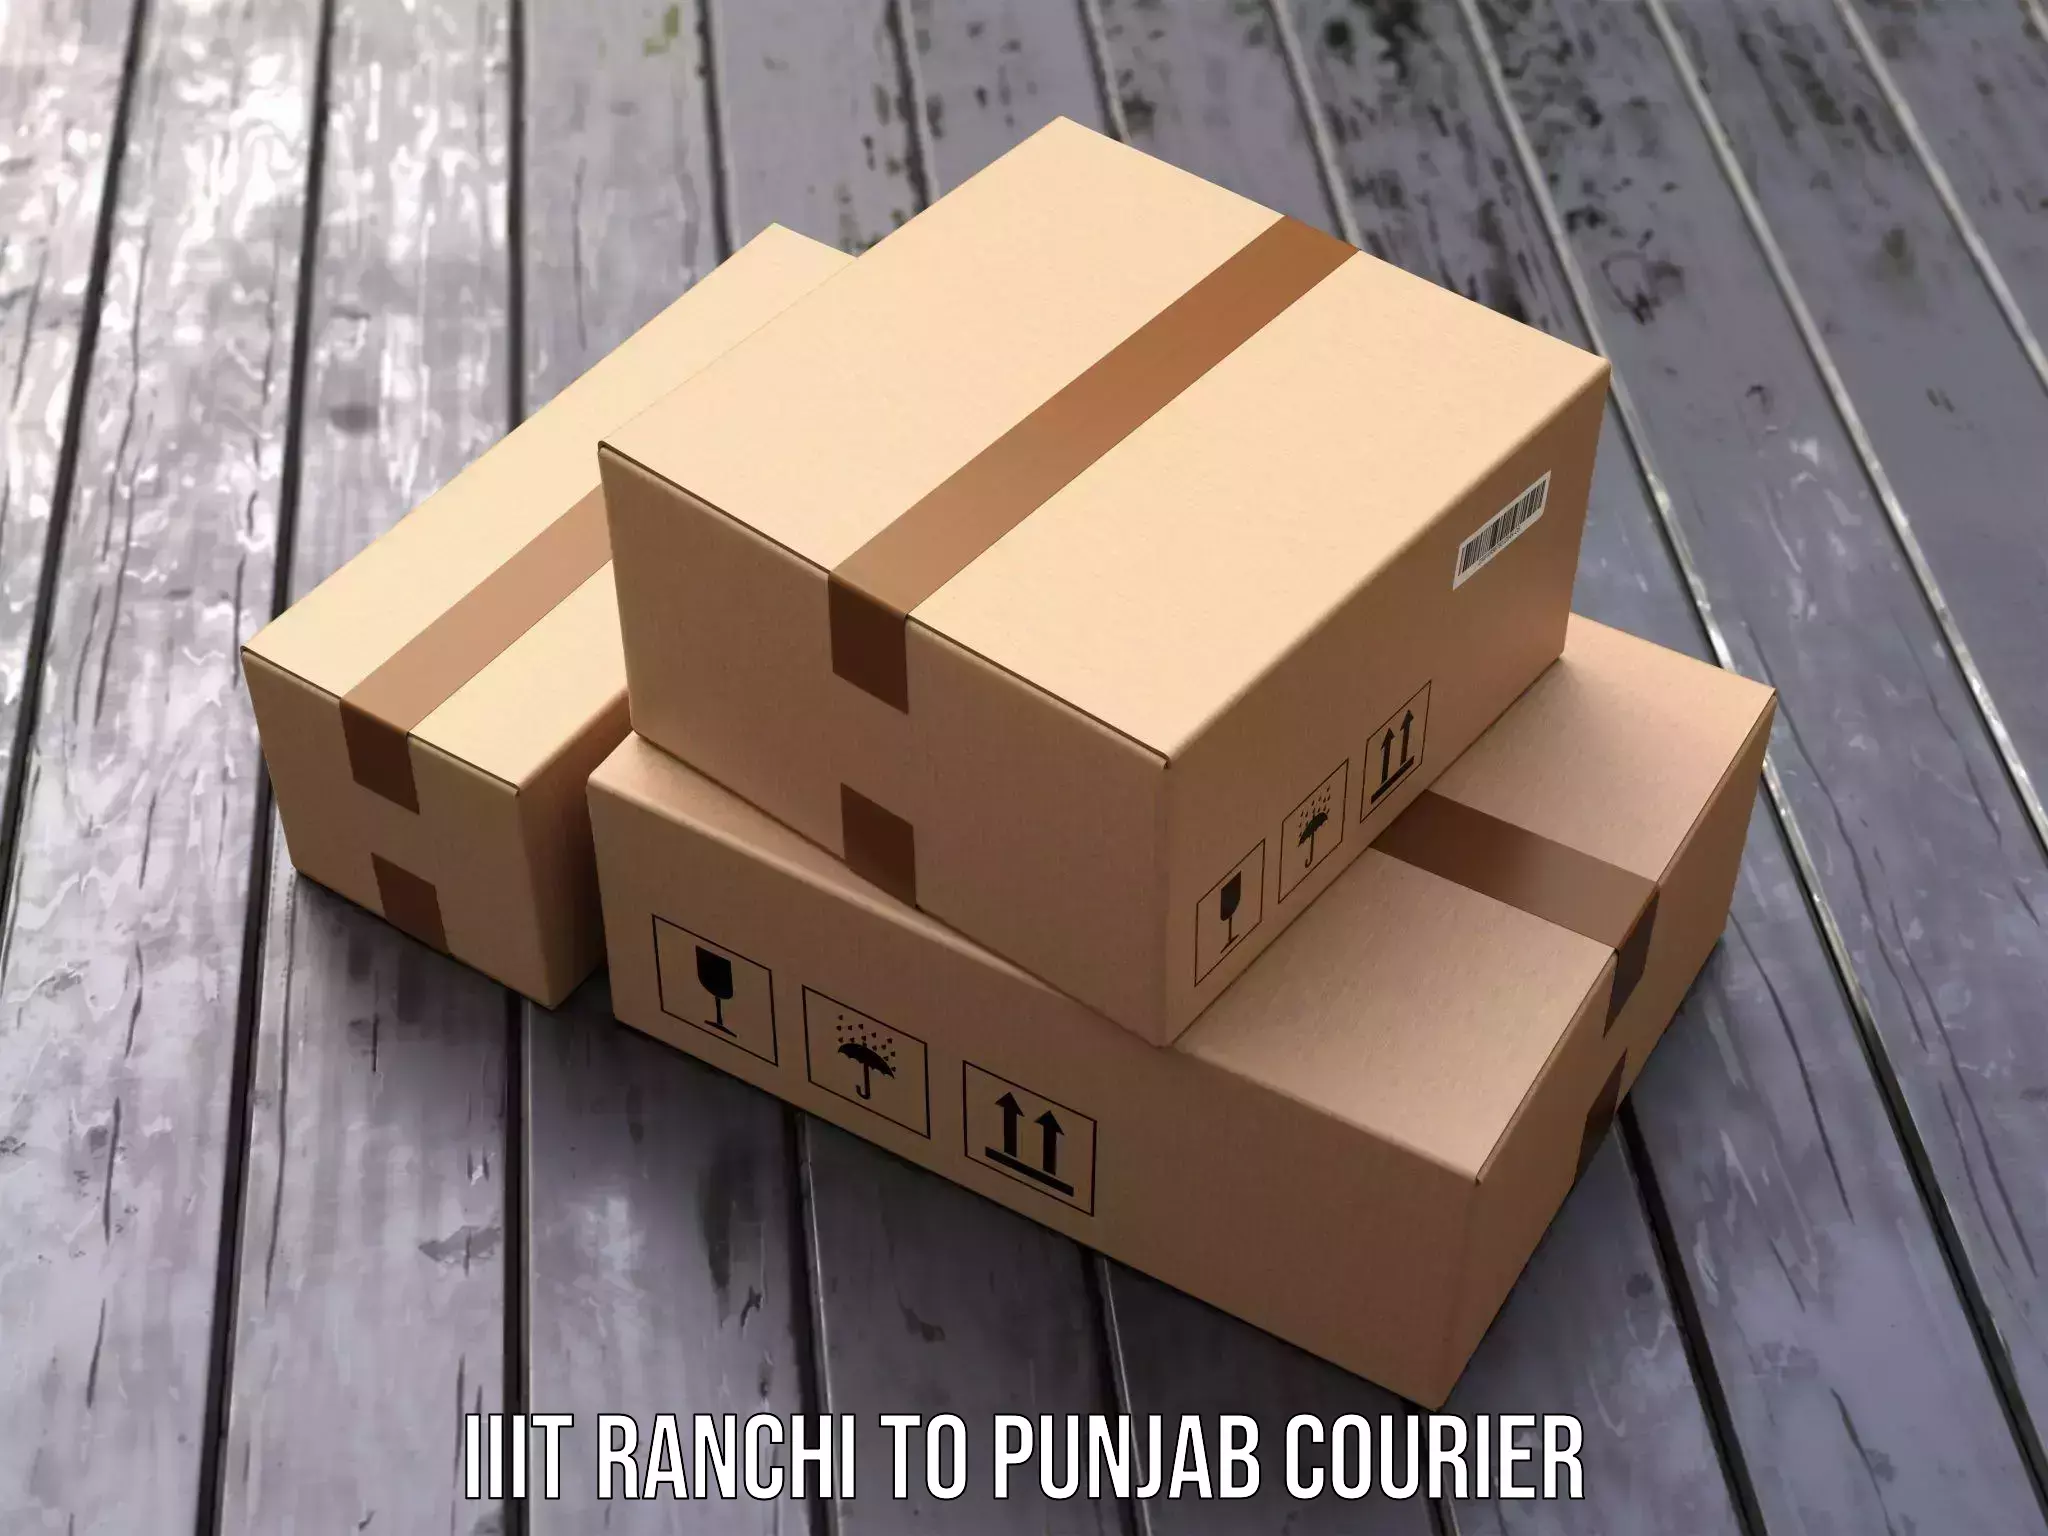 24/7 courier service IIIT Ranchi to Punjab